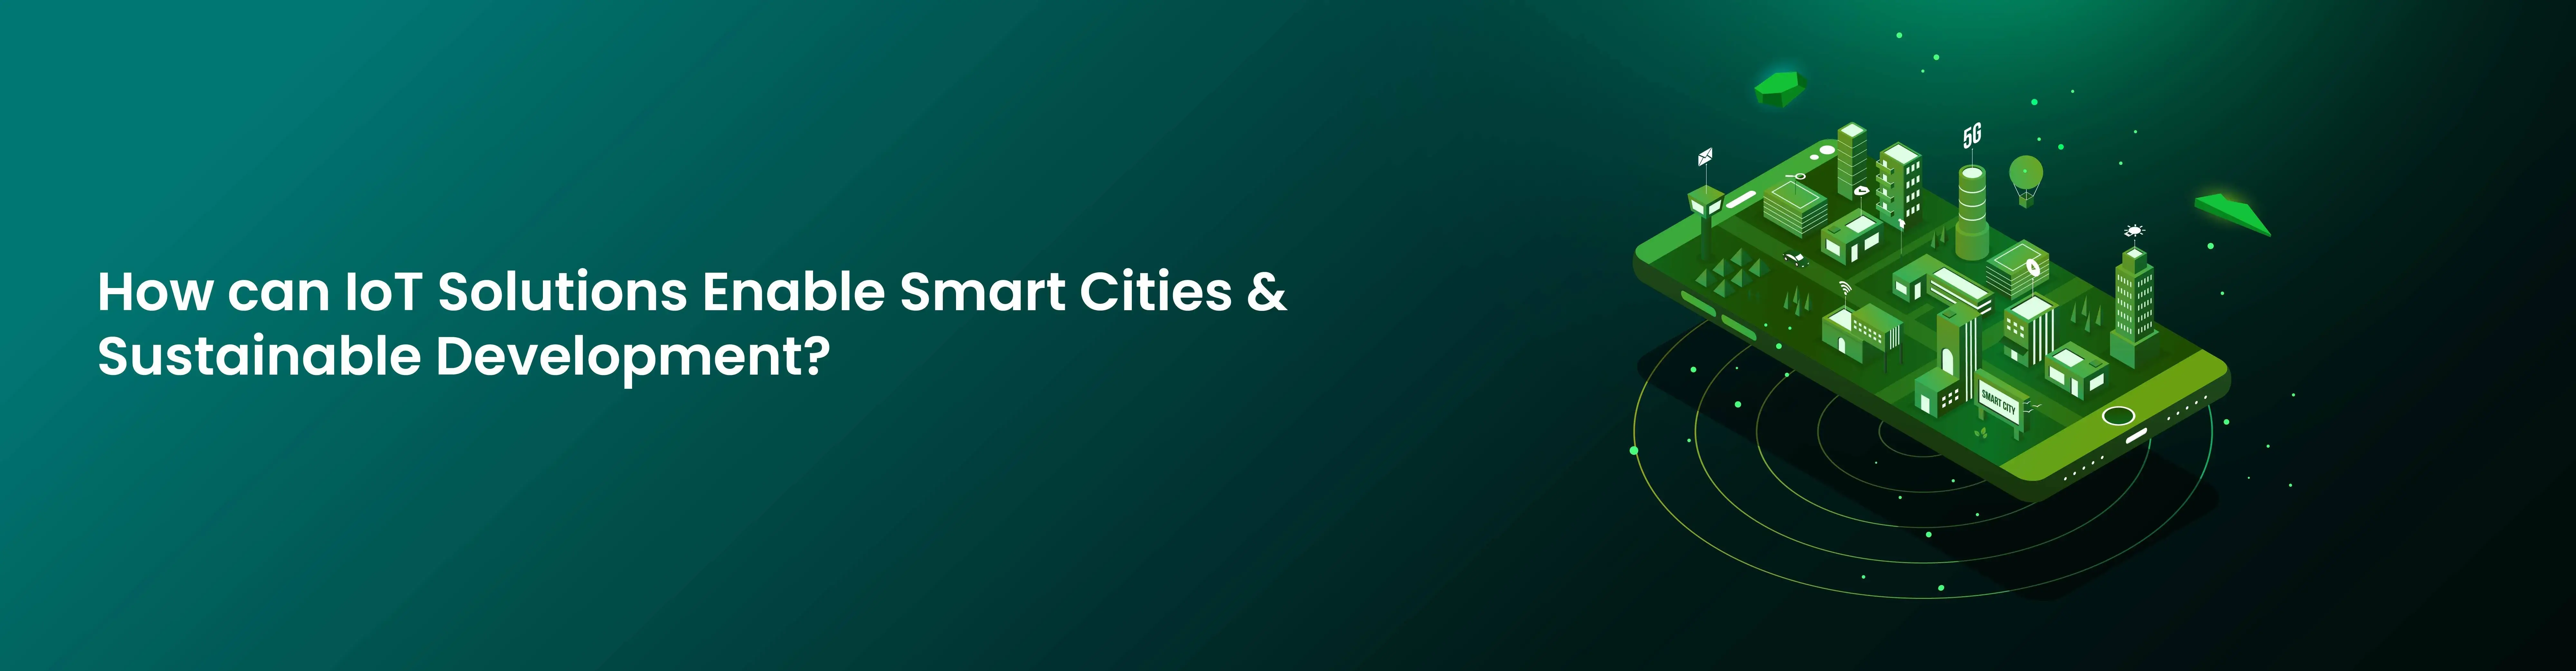 How can IoT Solutions Enable Smart Cities and Sustainable Development?